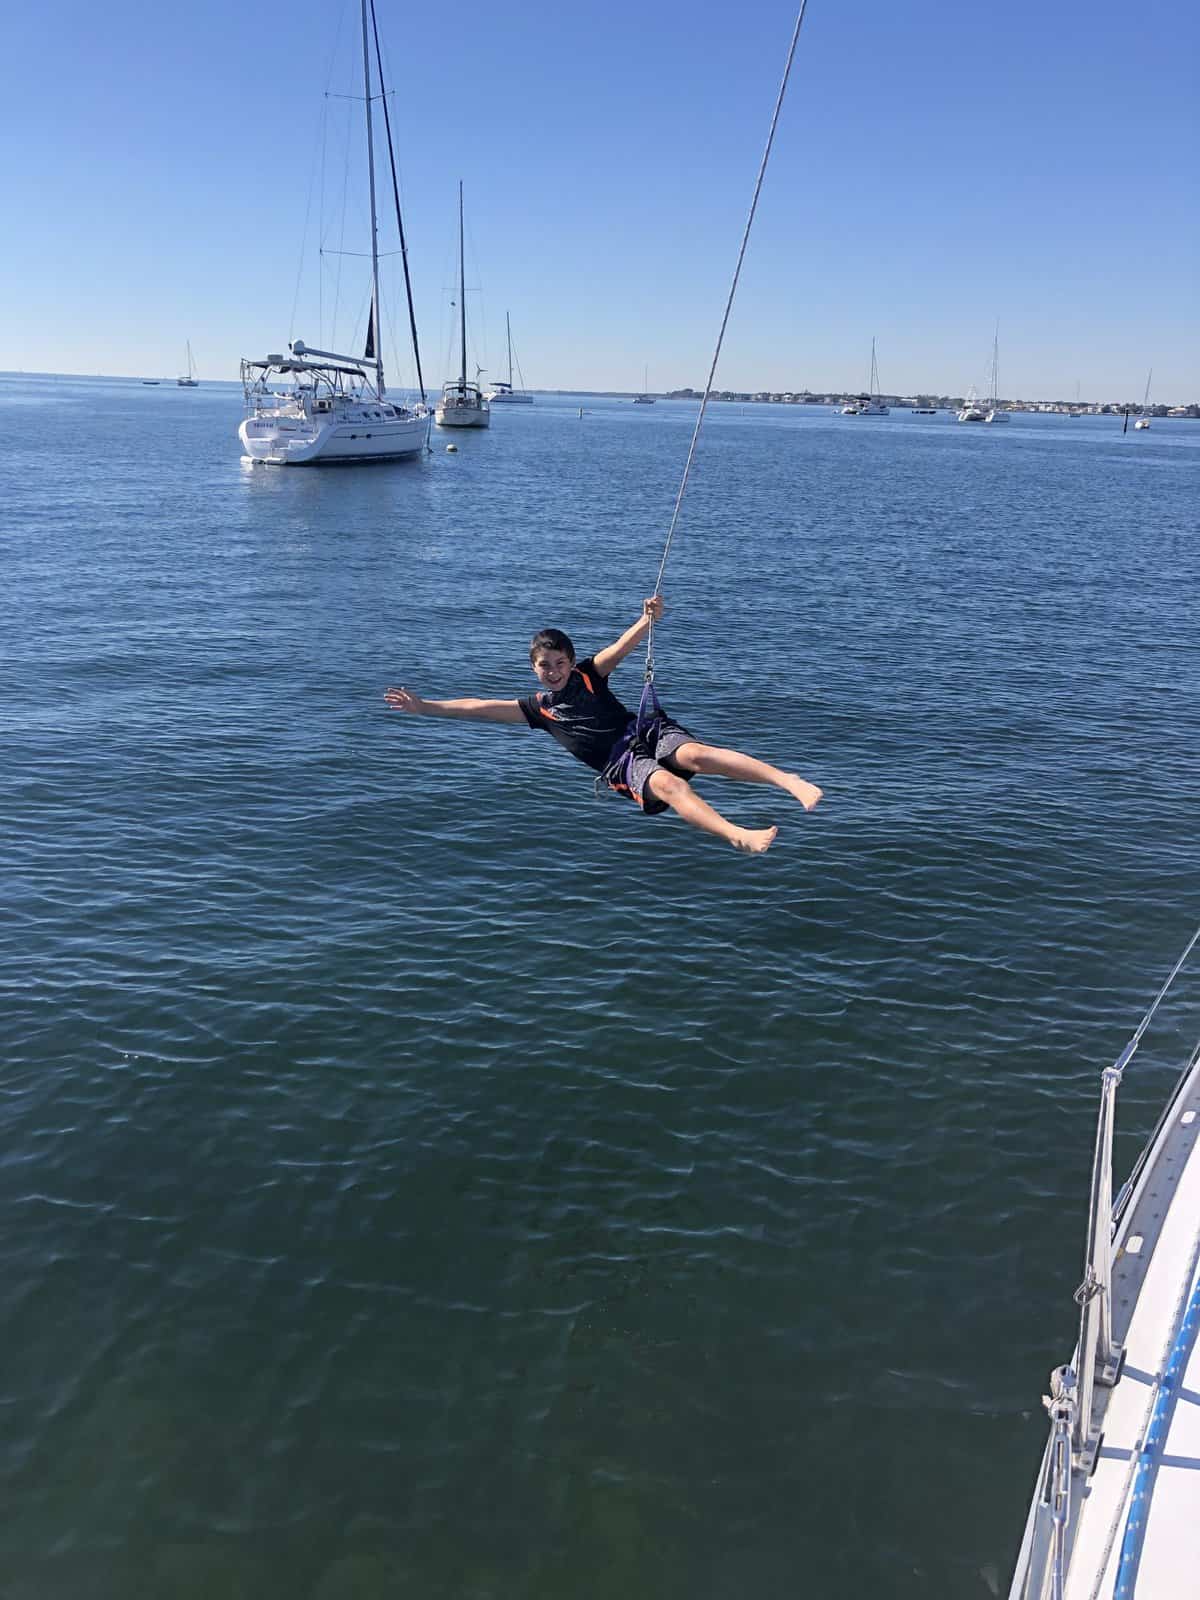 a boy in a harness, swinging on a boat